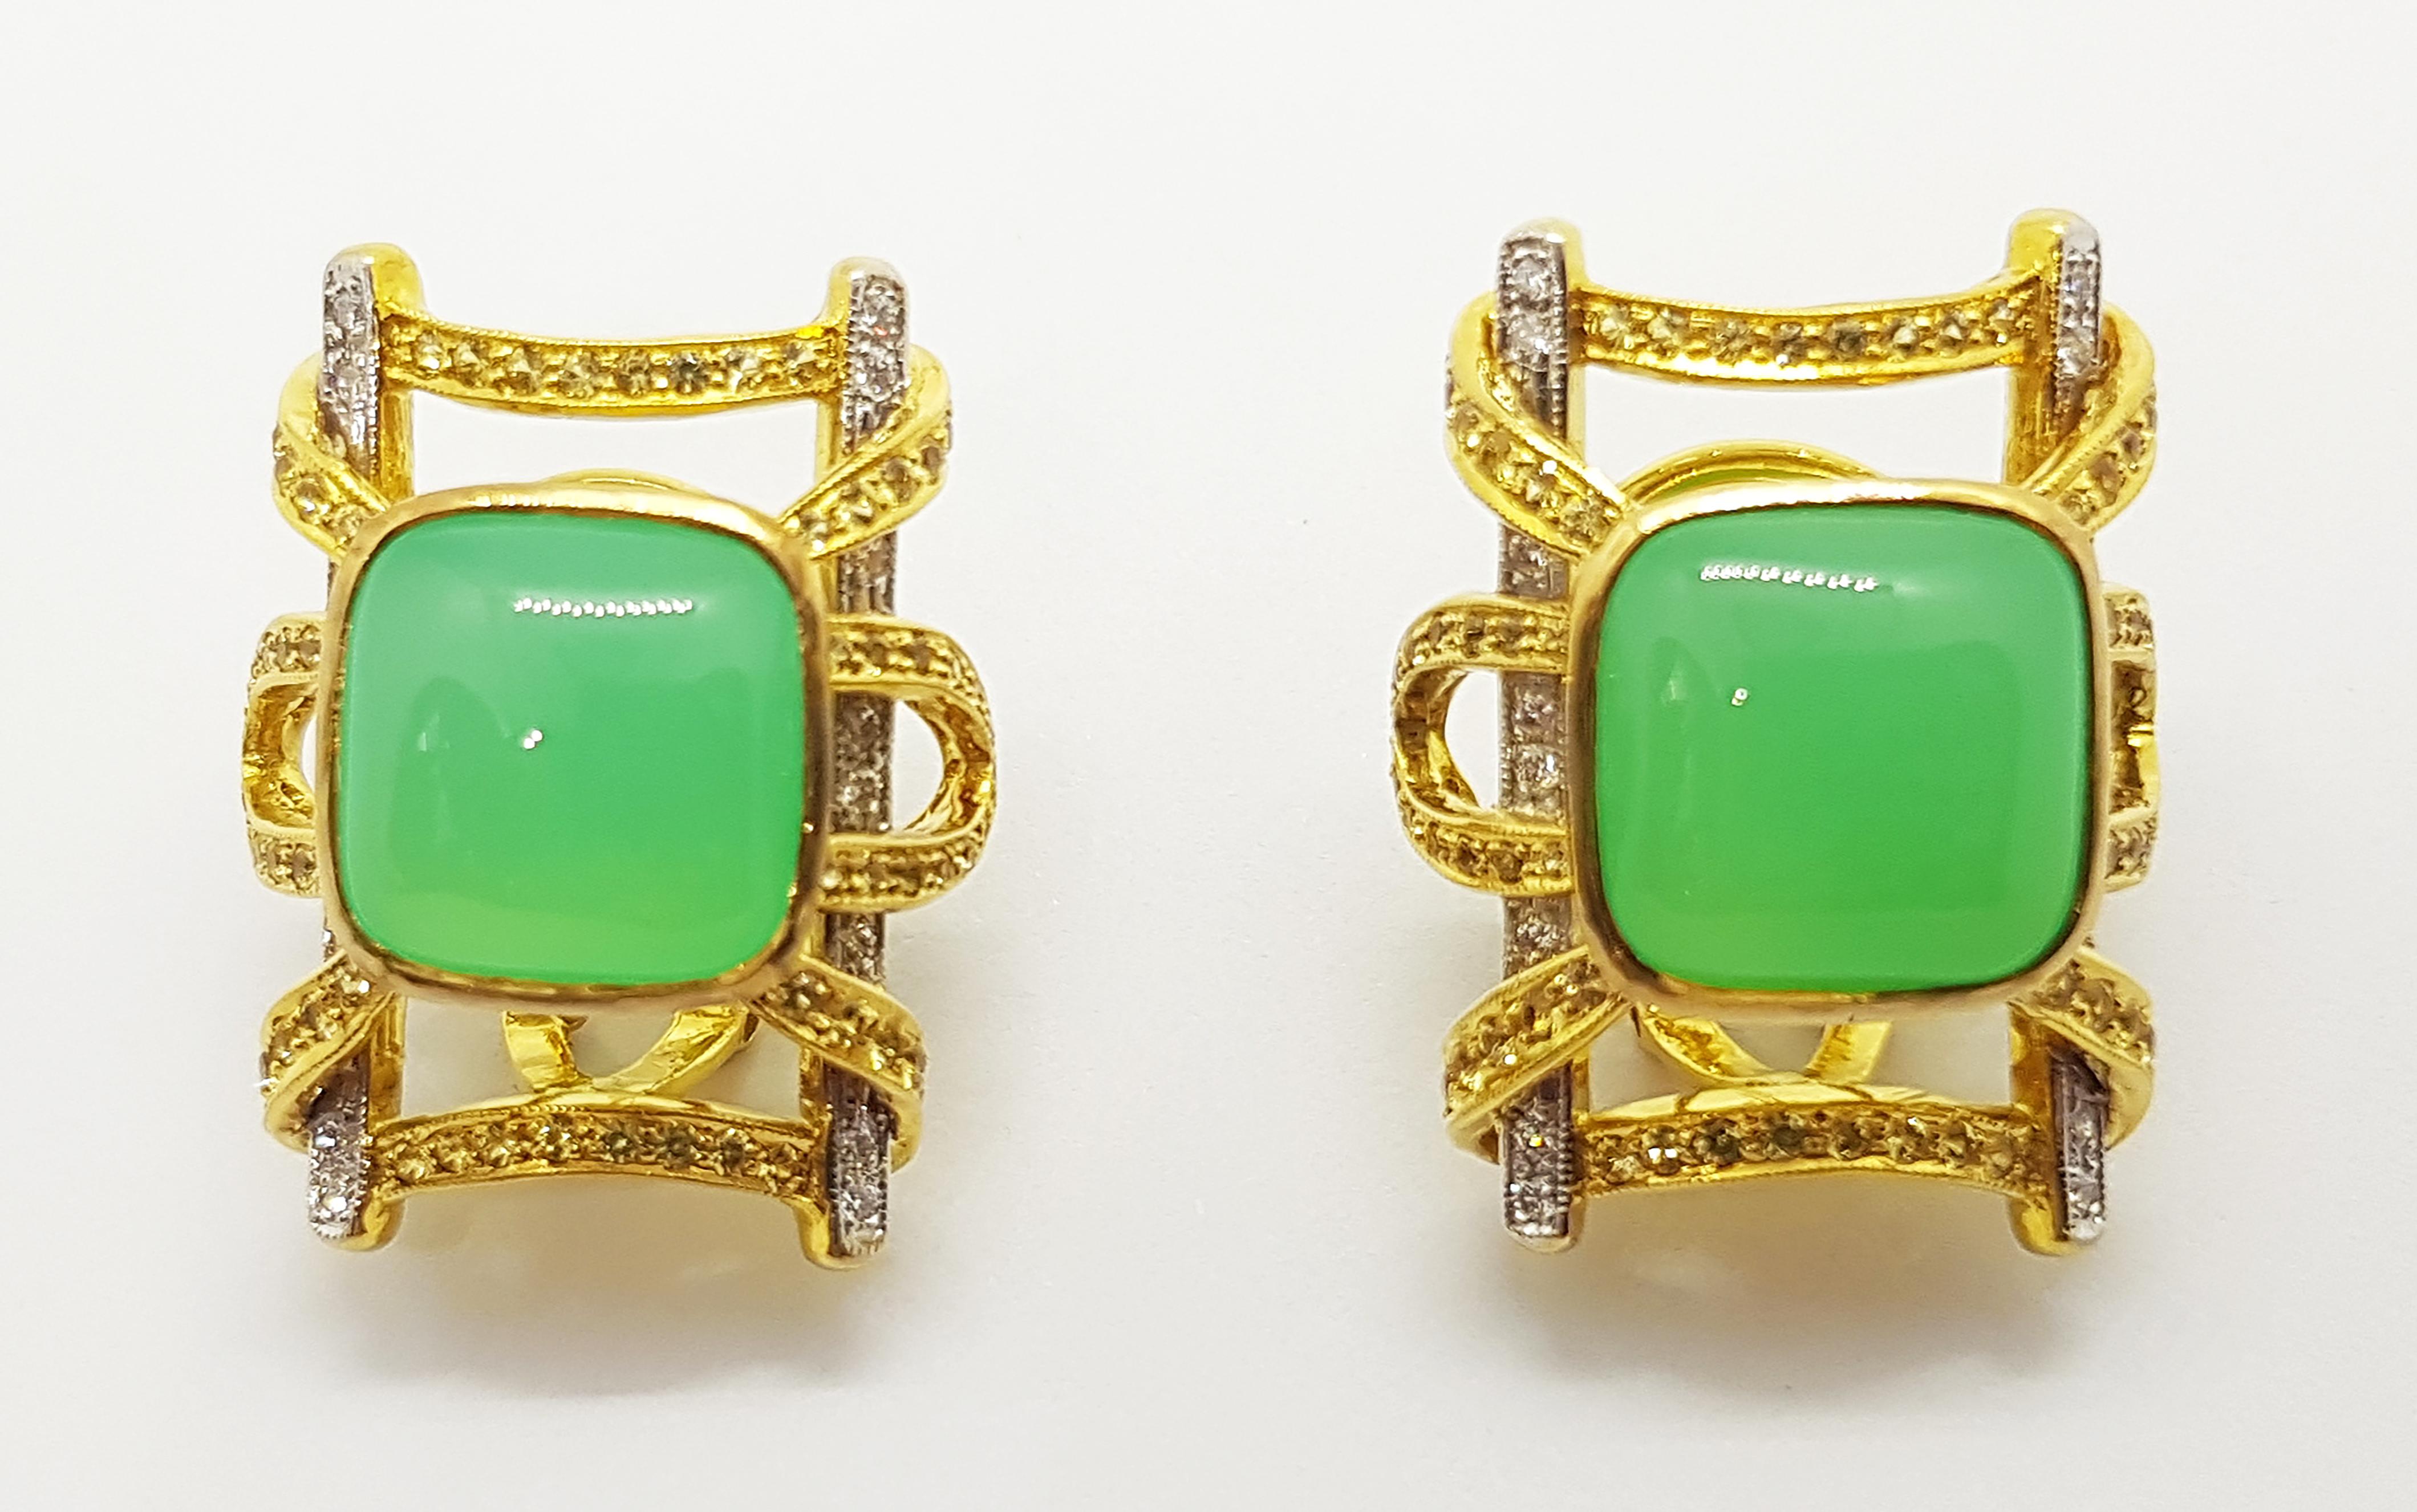 Chrysoprase 15.24 carats with Yellow Sapphire 1.34 carats and Diamond 0.30 carat Earrings set in 18 Karat Gold Settings

Width:  2.3 cm 
Length:  2.8 cm
Total Weight: 22.41 grams

FOUNDED BY AWARD-WINNING COUPLE, NUTTAPON (KENNY) & SHAR-LINN, KAVANT